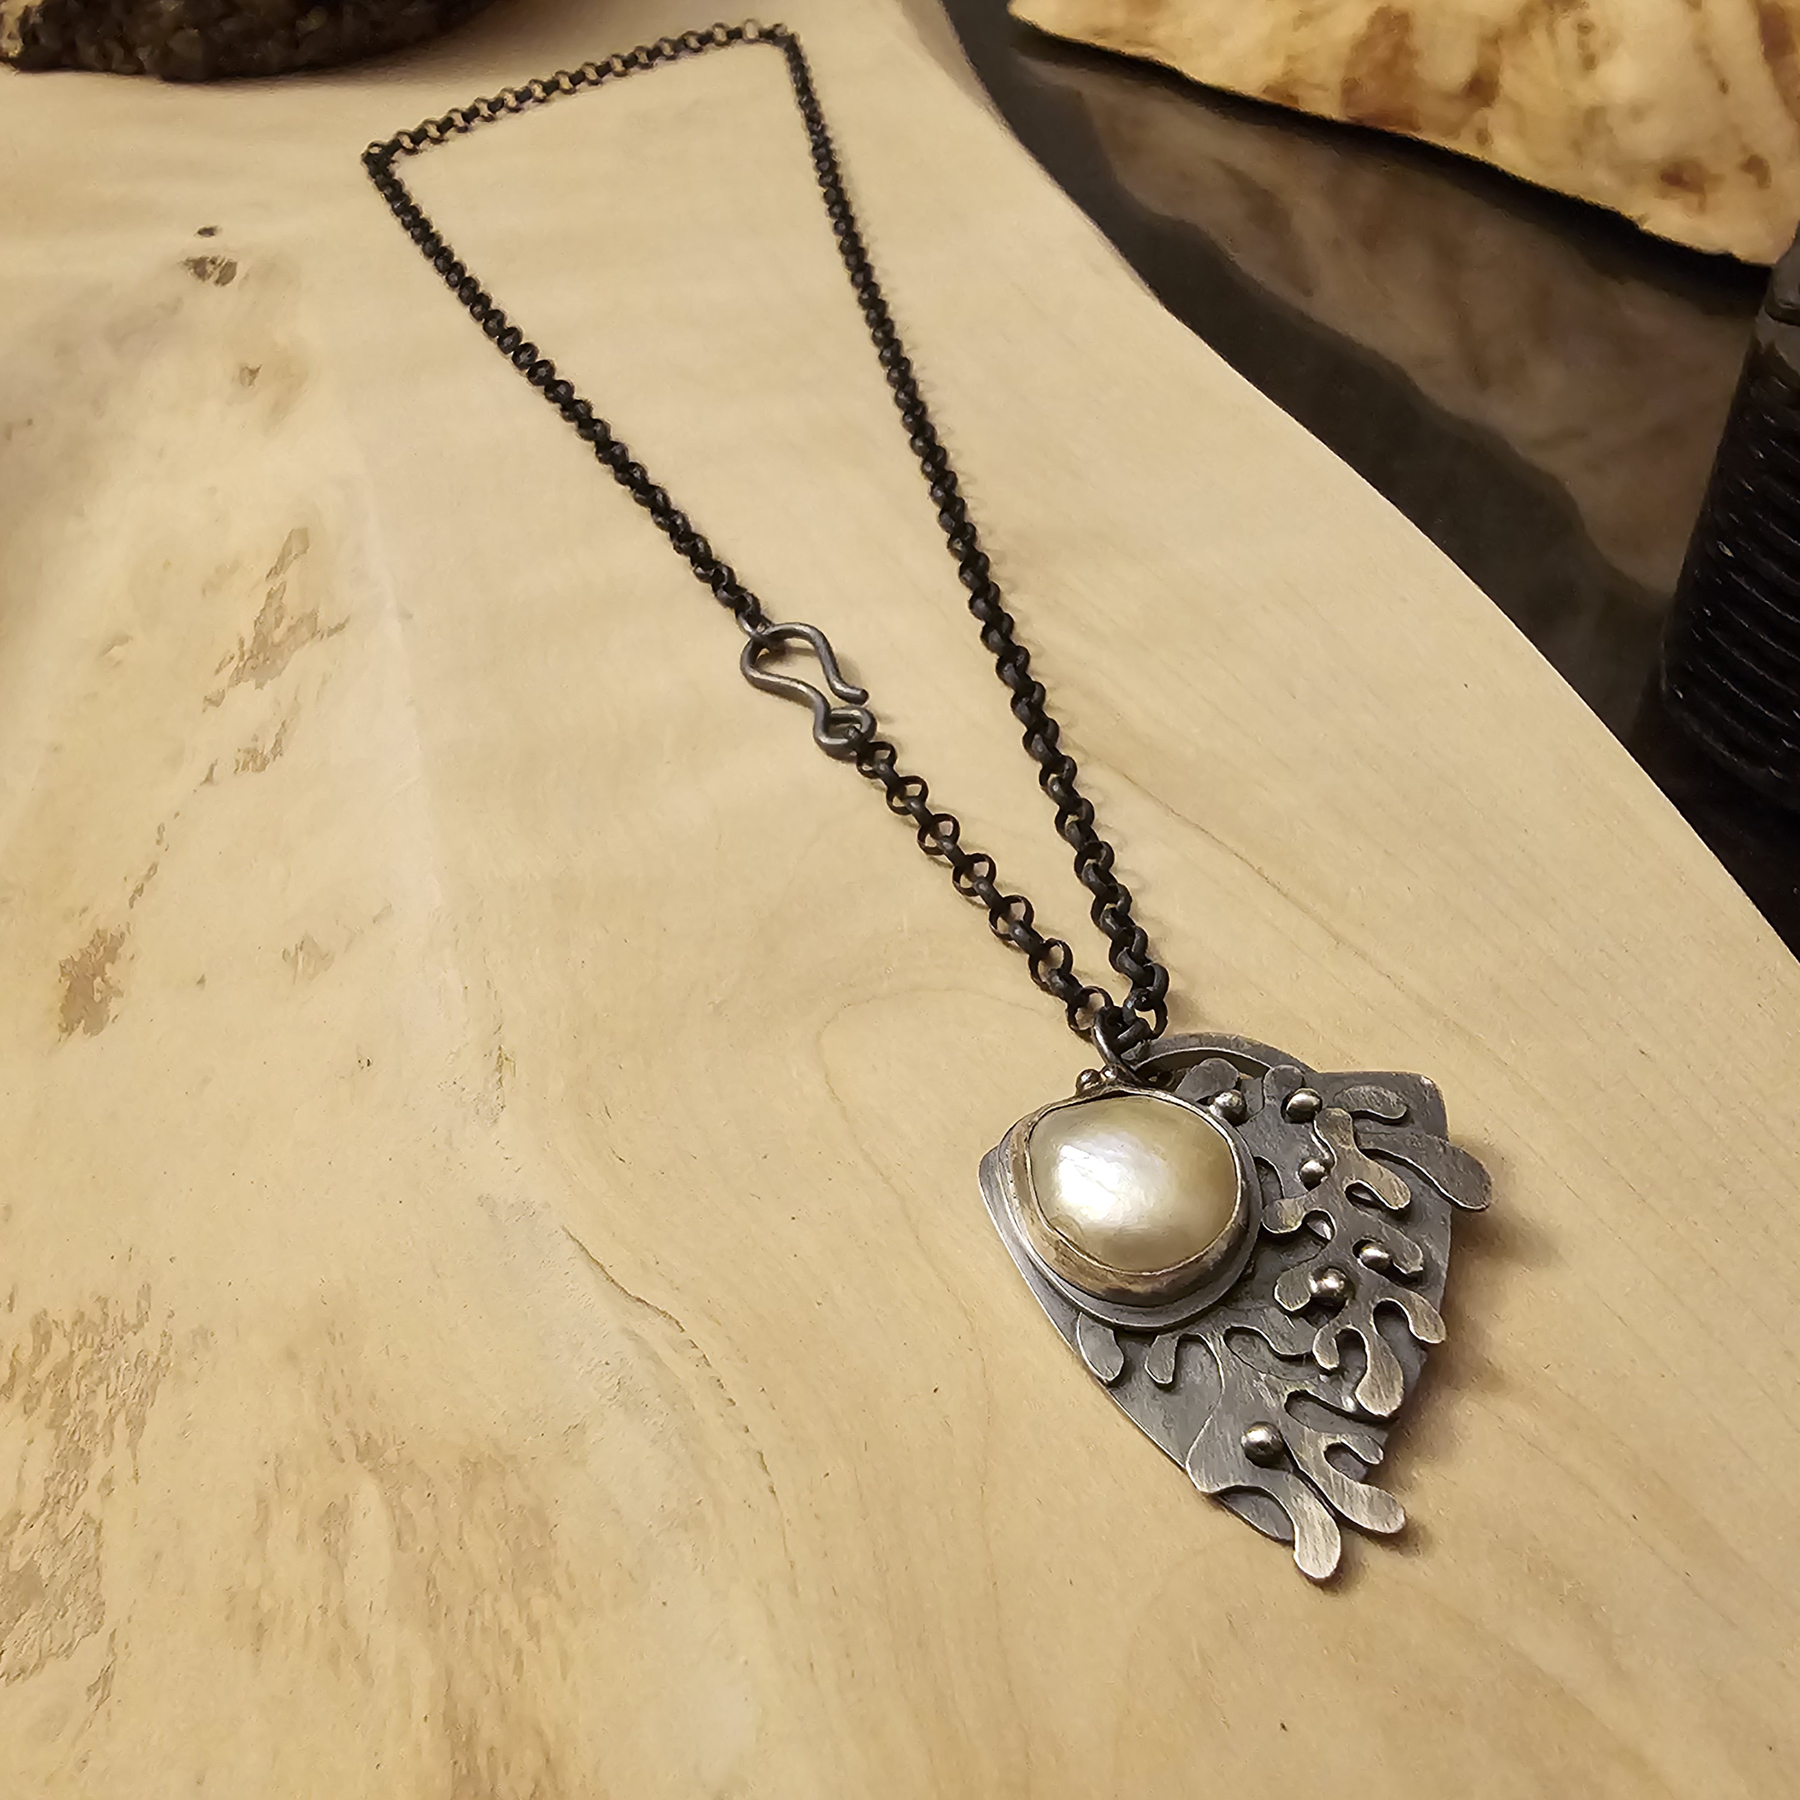 Silver lichen pendant with pearl, image courtesy of Christen Booth